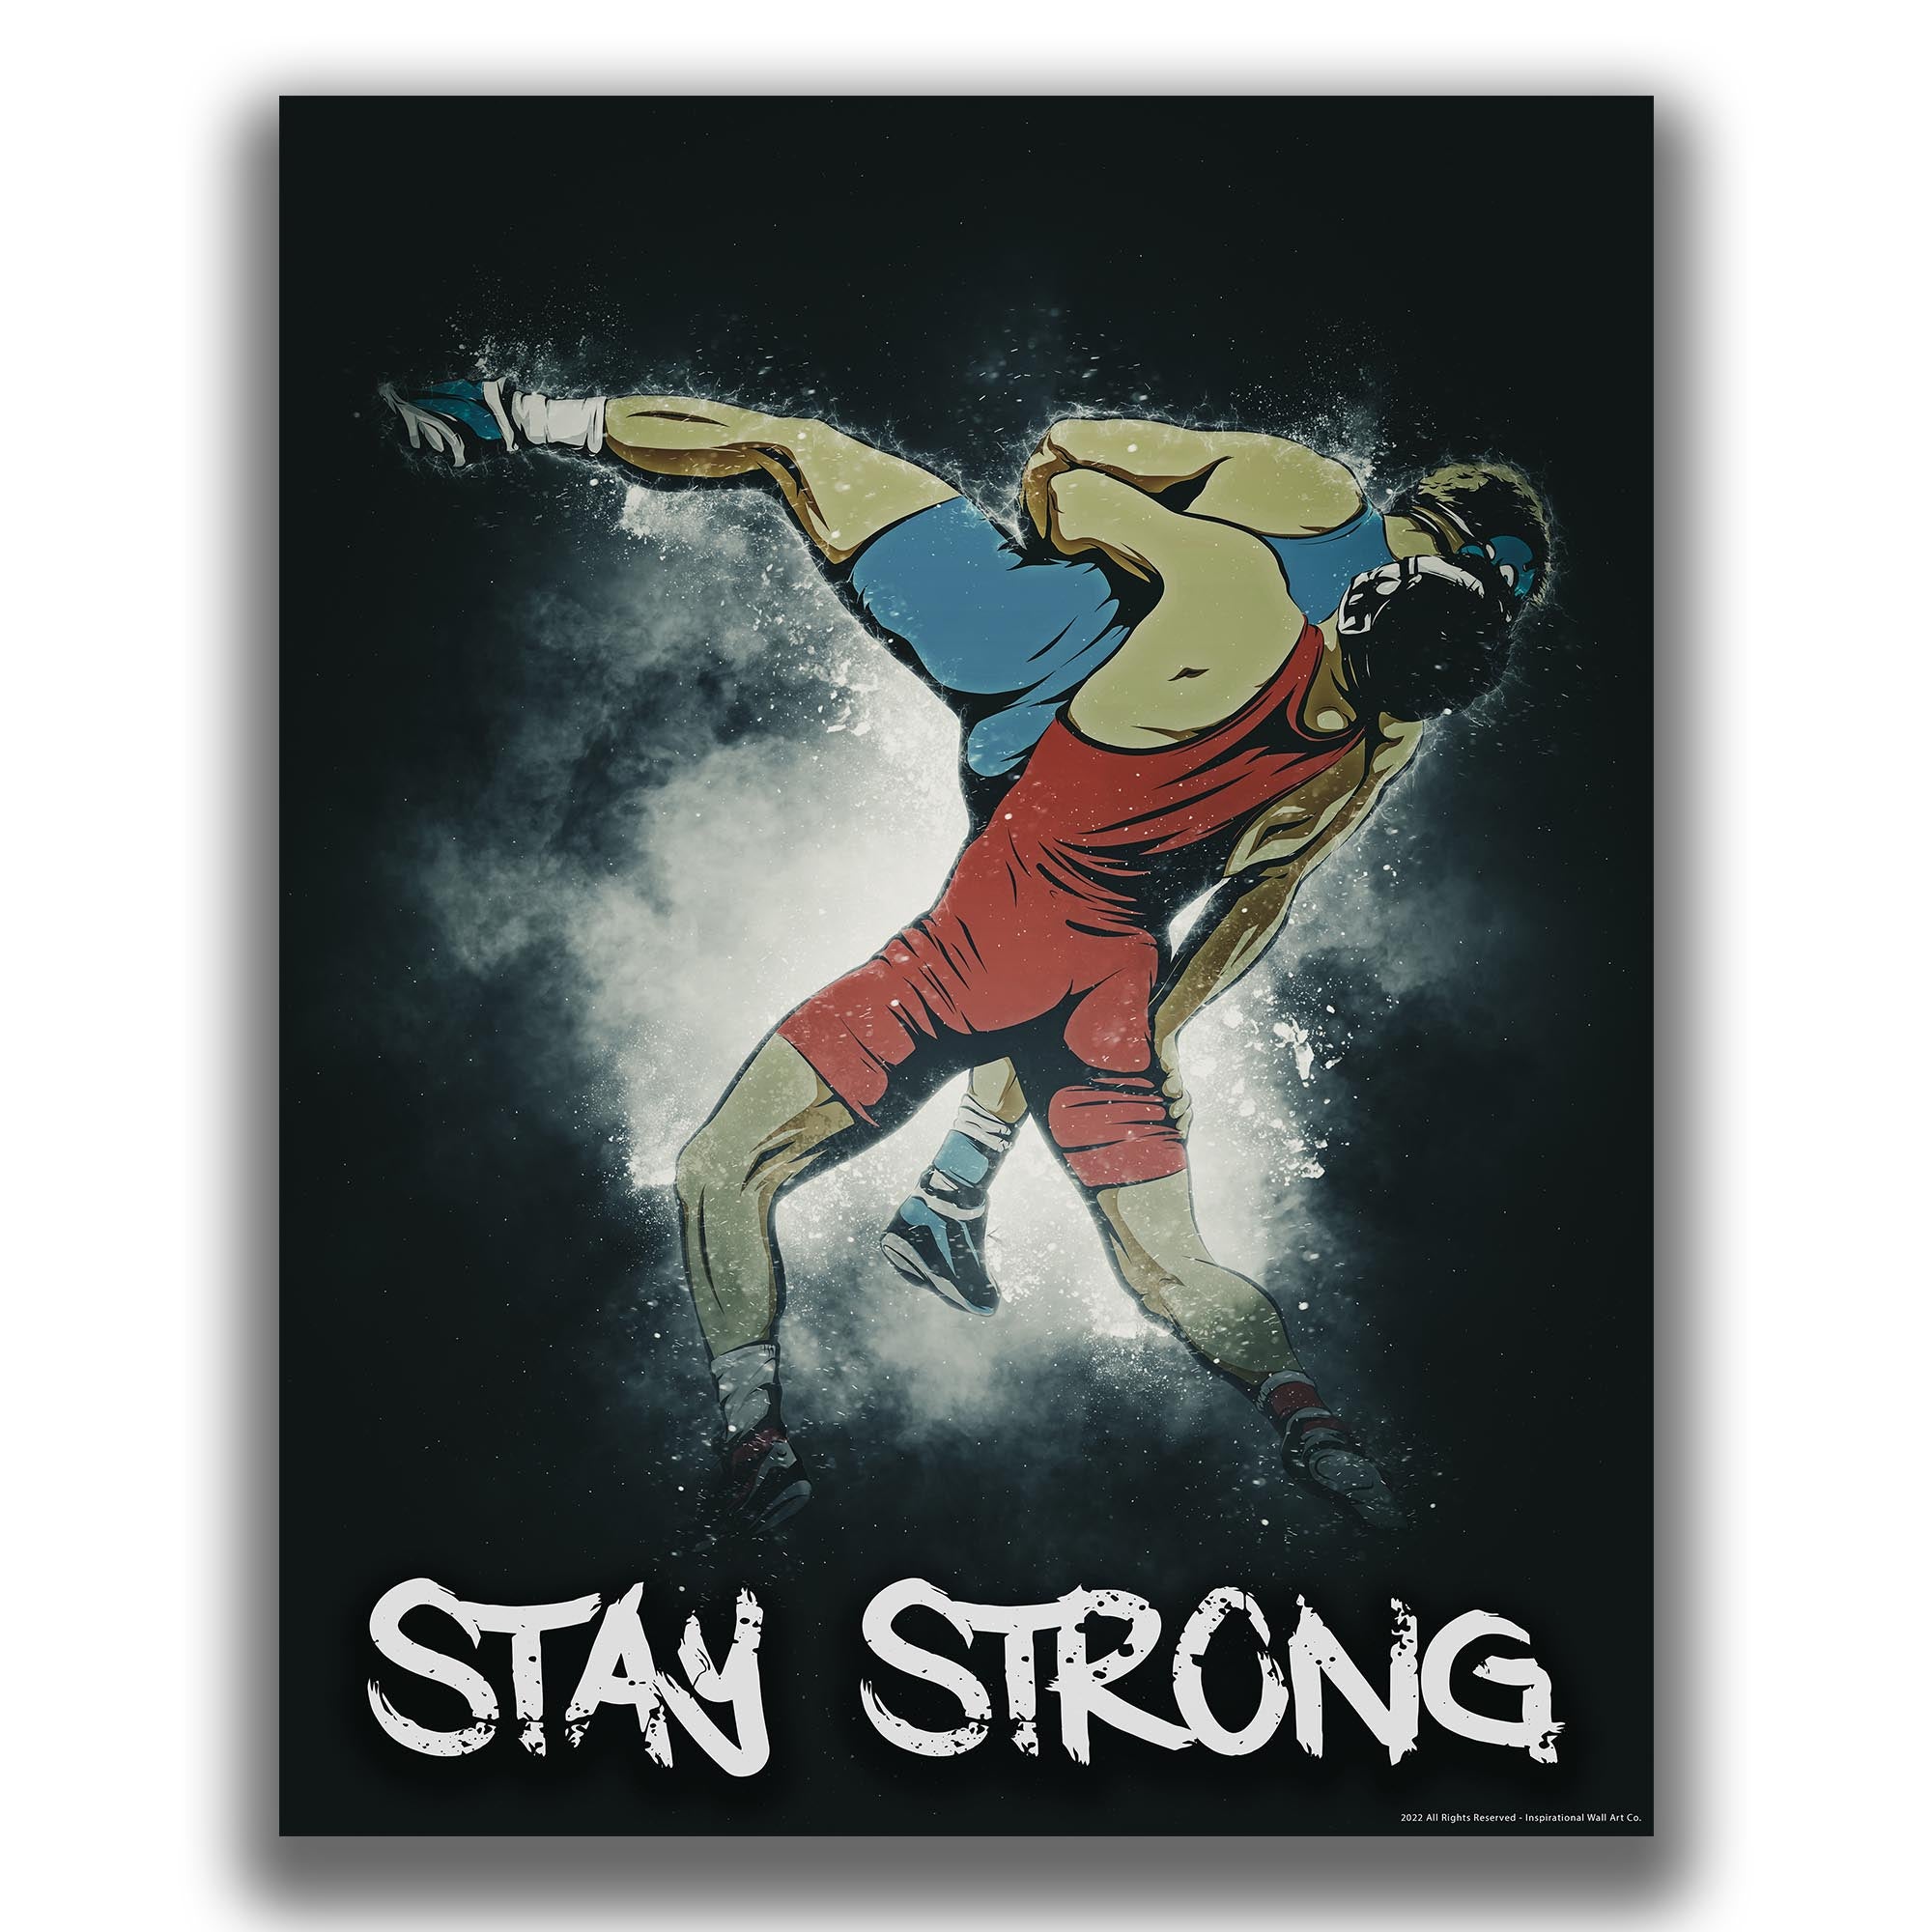 Stay Strong - Wrestling Poster